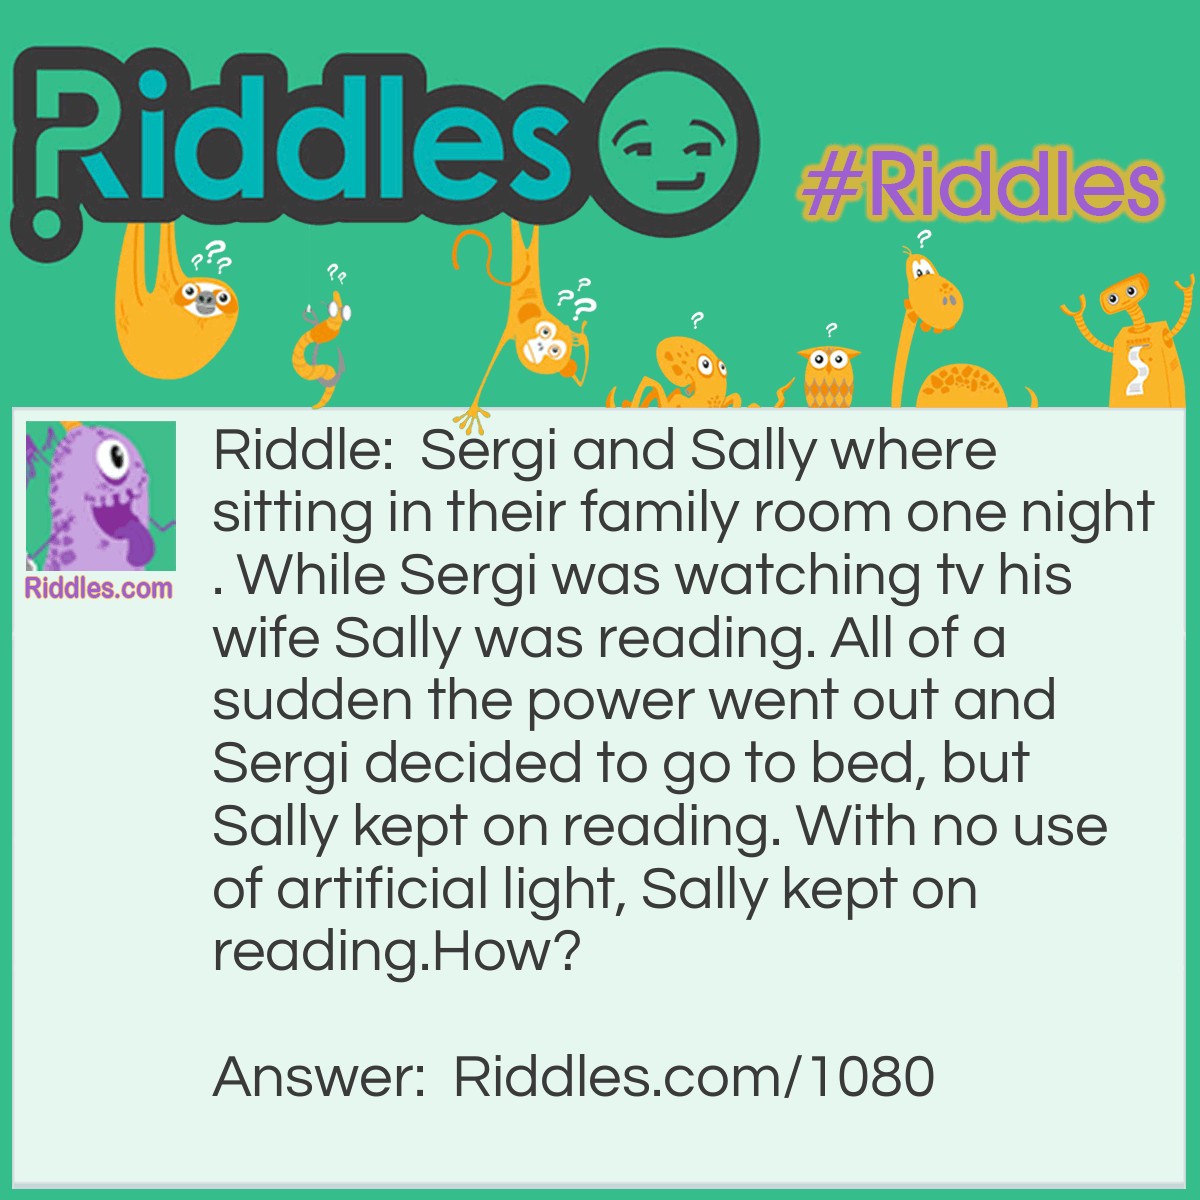 Riddle: Sergi and Sally where sitting in their family room one night. While Sergi was watching tv his wife Sally was reading. All of a sudden the power went out and Sergi decided to go to bed, but Sally kept on reading. With no use of artificial light, Sally kept on reading.
How? Answer: Sally was blind... she was reading a book by Braille.